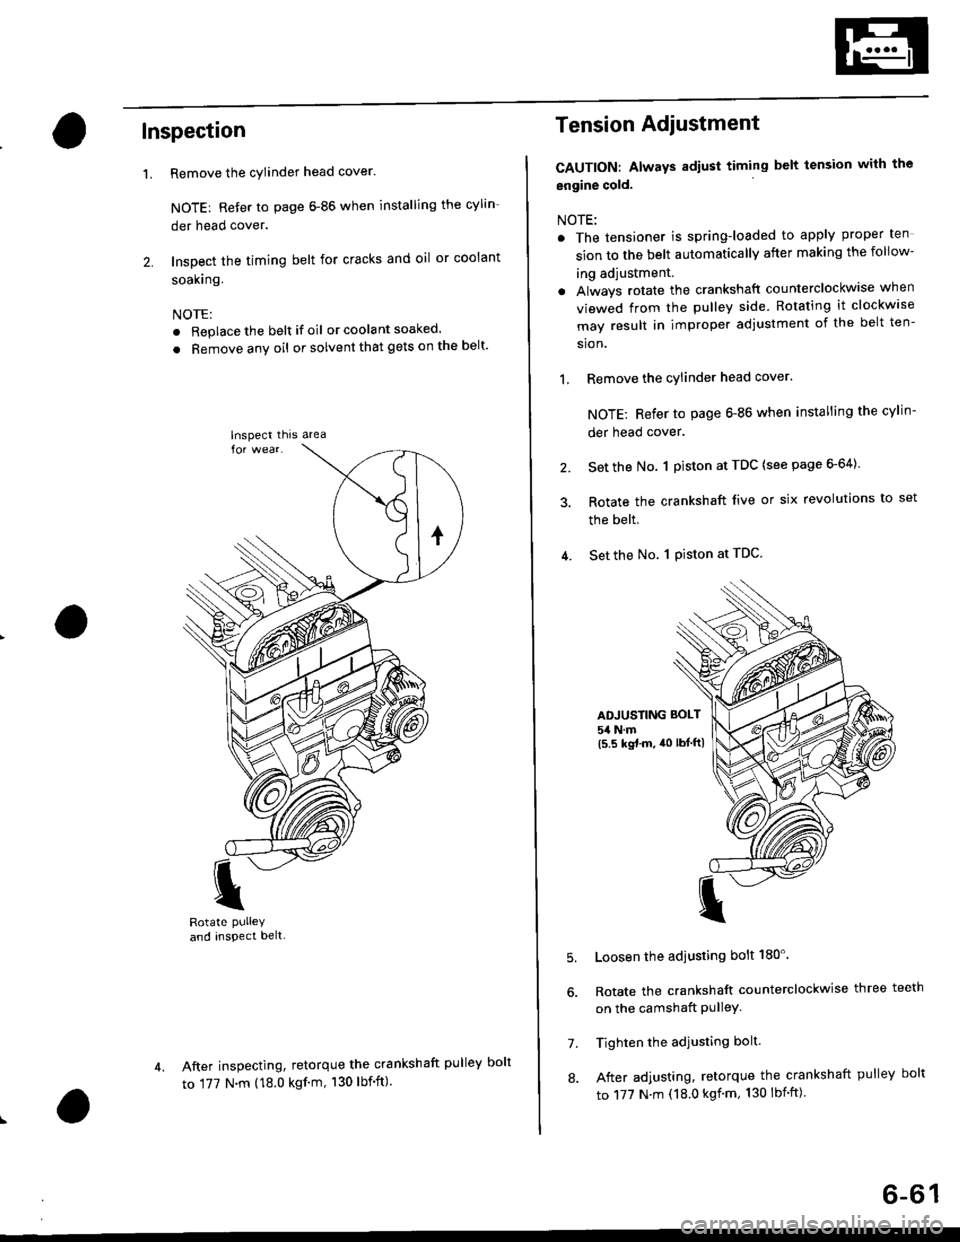 HONDA CIVIC 1998 6.G Workshop Manual Inspection
Remove the cylinder head cover.
NOTE: Refer to page 6-86 when installing the cylin-
der head cover.
Inspect the timing belt for cracks and oil or coolant
soakrng.
NOTE:
. Replace the belt i